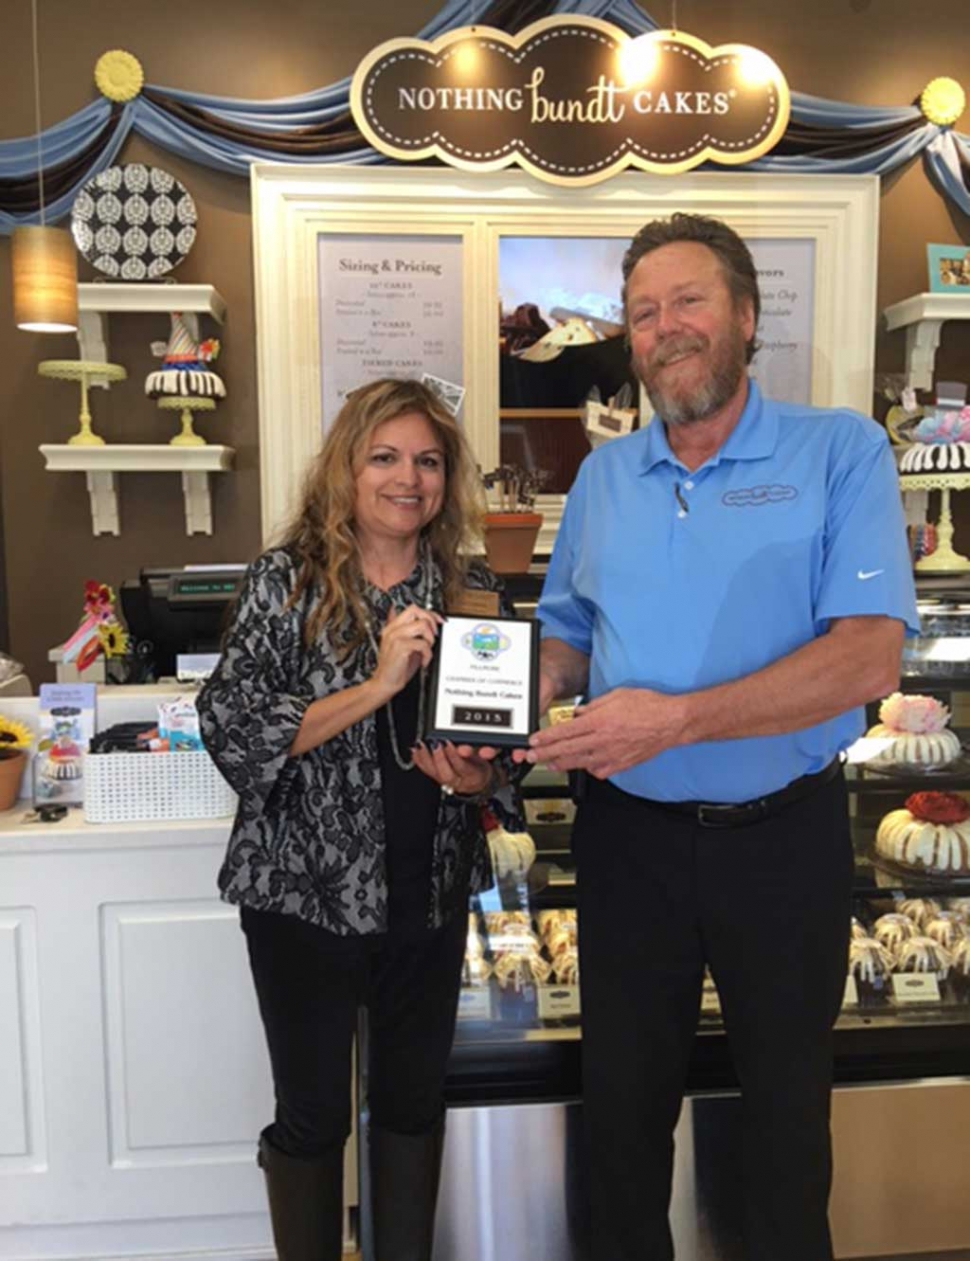 Welcome to our Fillmore Chamber member Nothing Bundt Cakes (1794 S. Victoria Ave.) in Ventura. They have ten cake flavors to choose from and forty unique cake designs. They also feature gifts and cards. Ari Larson from the Fillmore Chamber of Commerce hands Tom Downey the membership plaque.